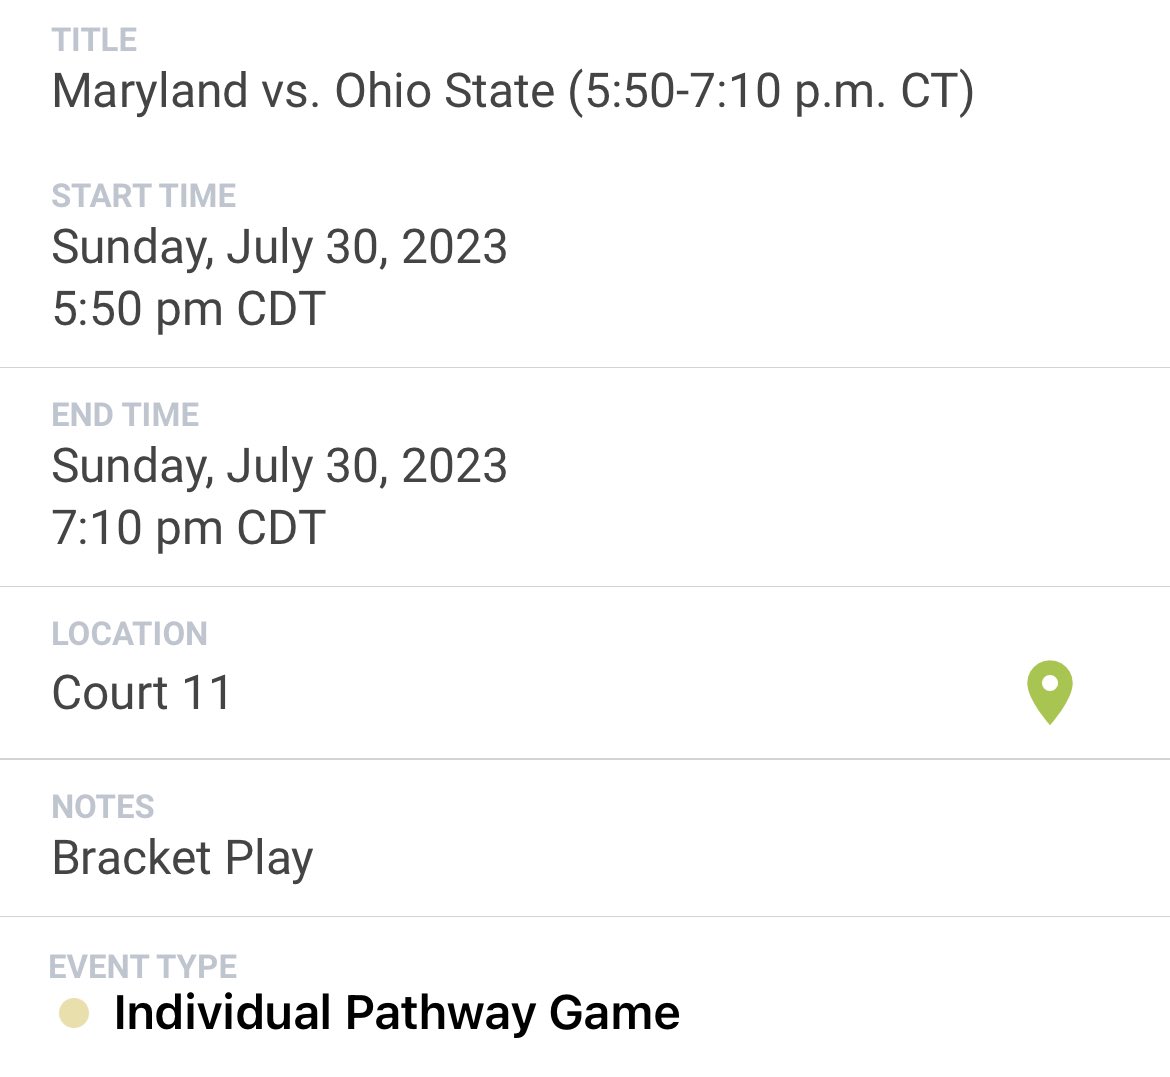 Come watch my team Ohio state compete again today at the NCAA College Basketball Academy!! I’ll be wearing jersey # 220! @TheCBBAcademy @sjhabasketball